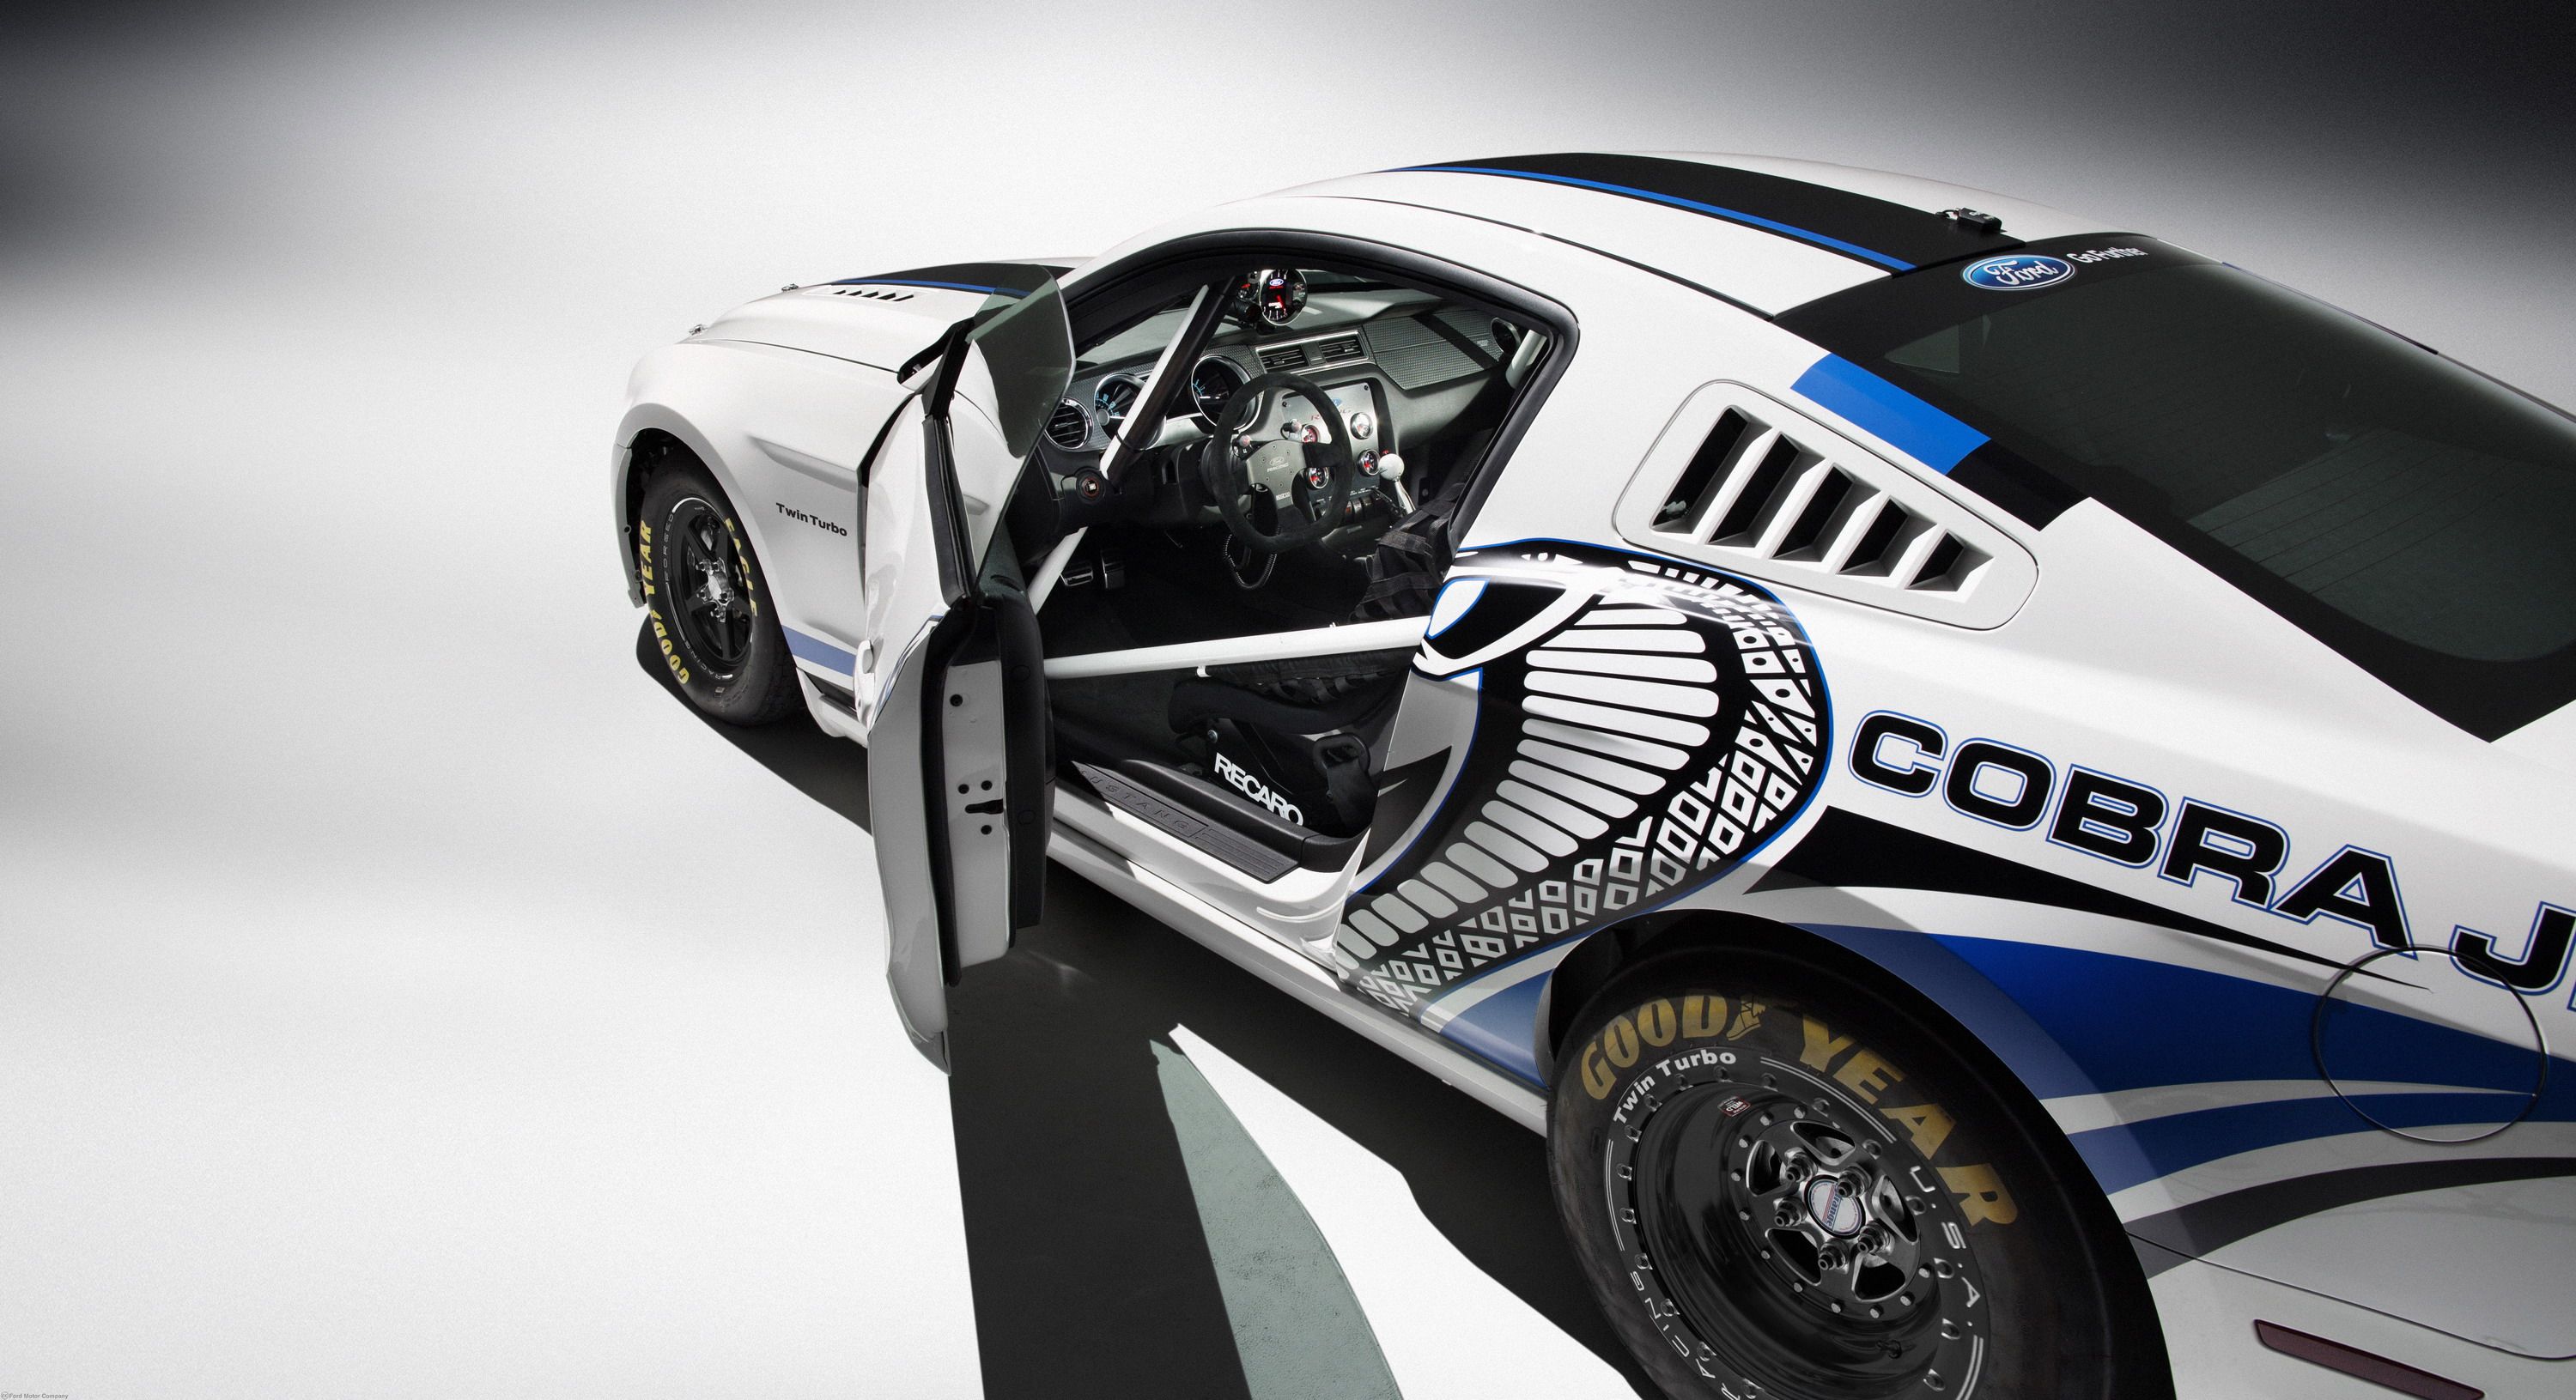 2013 Ford Mustang Cobra Jet Twin-Turbo Concept